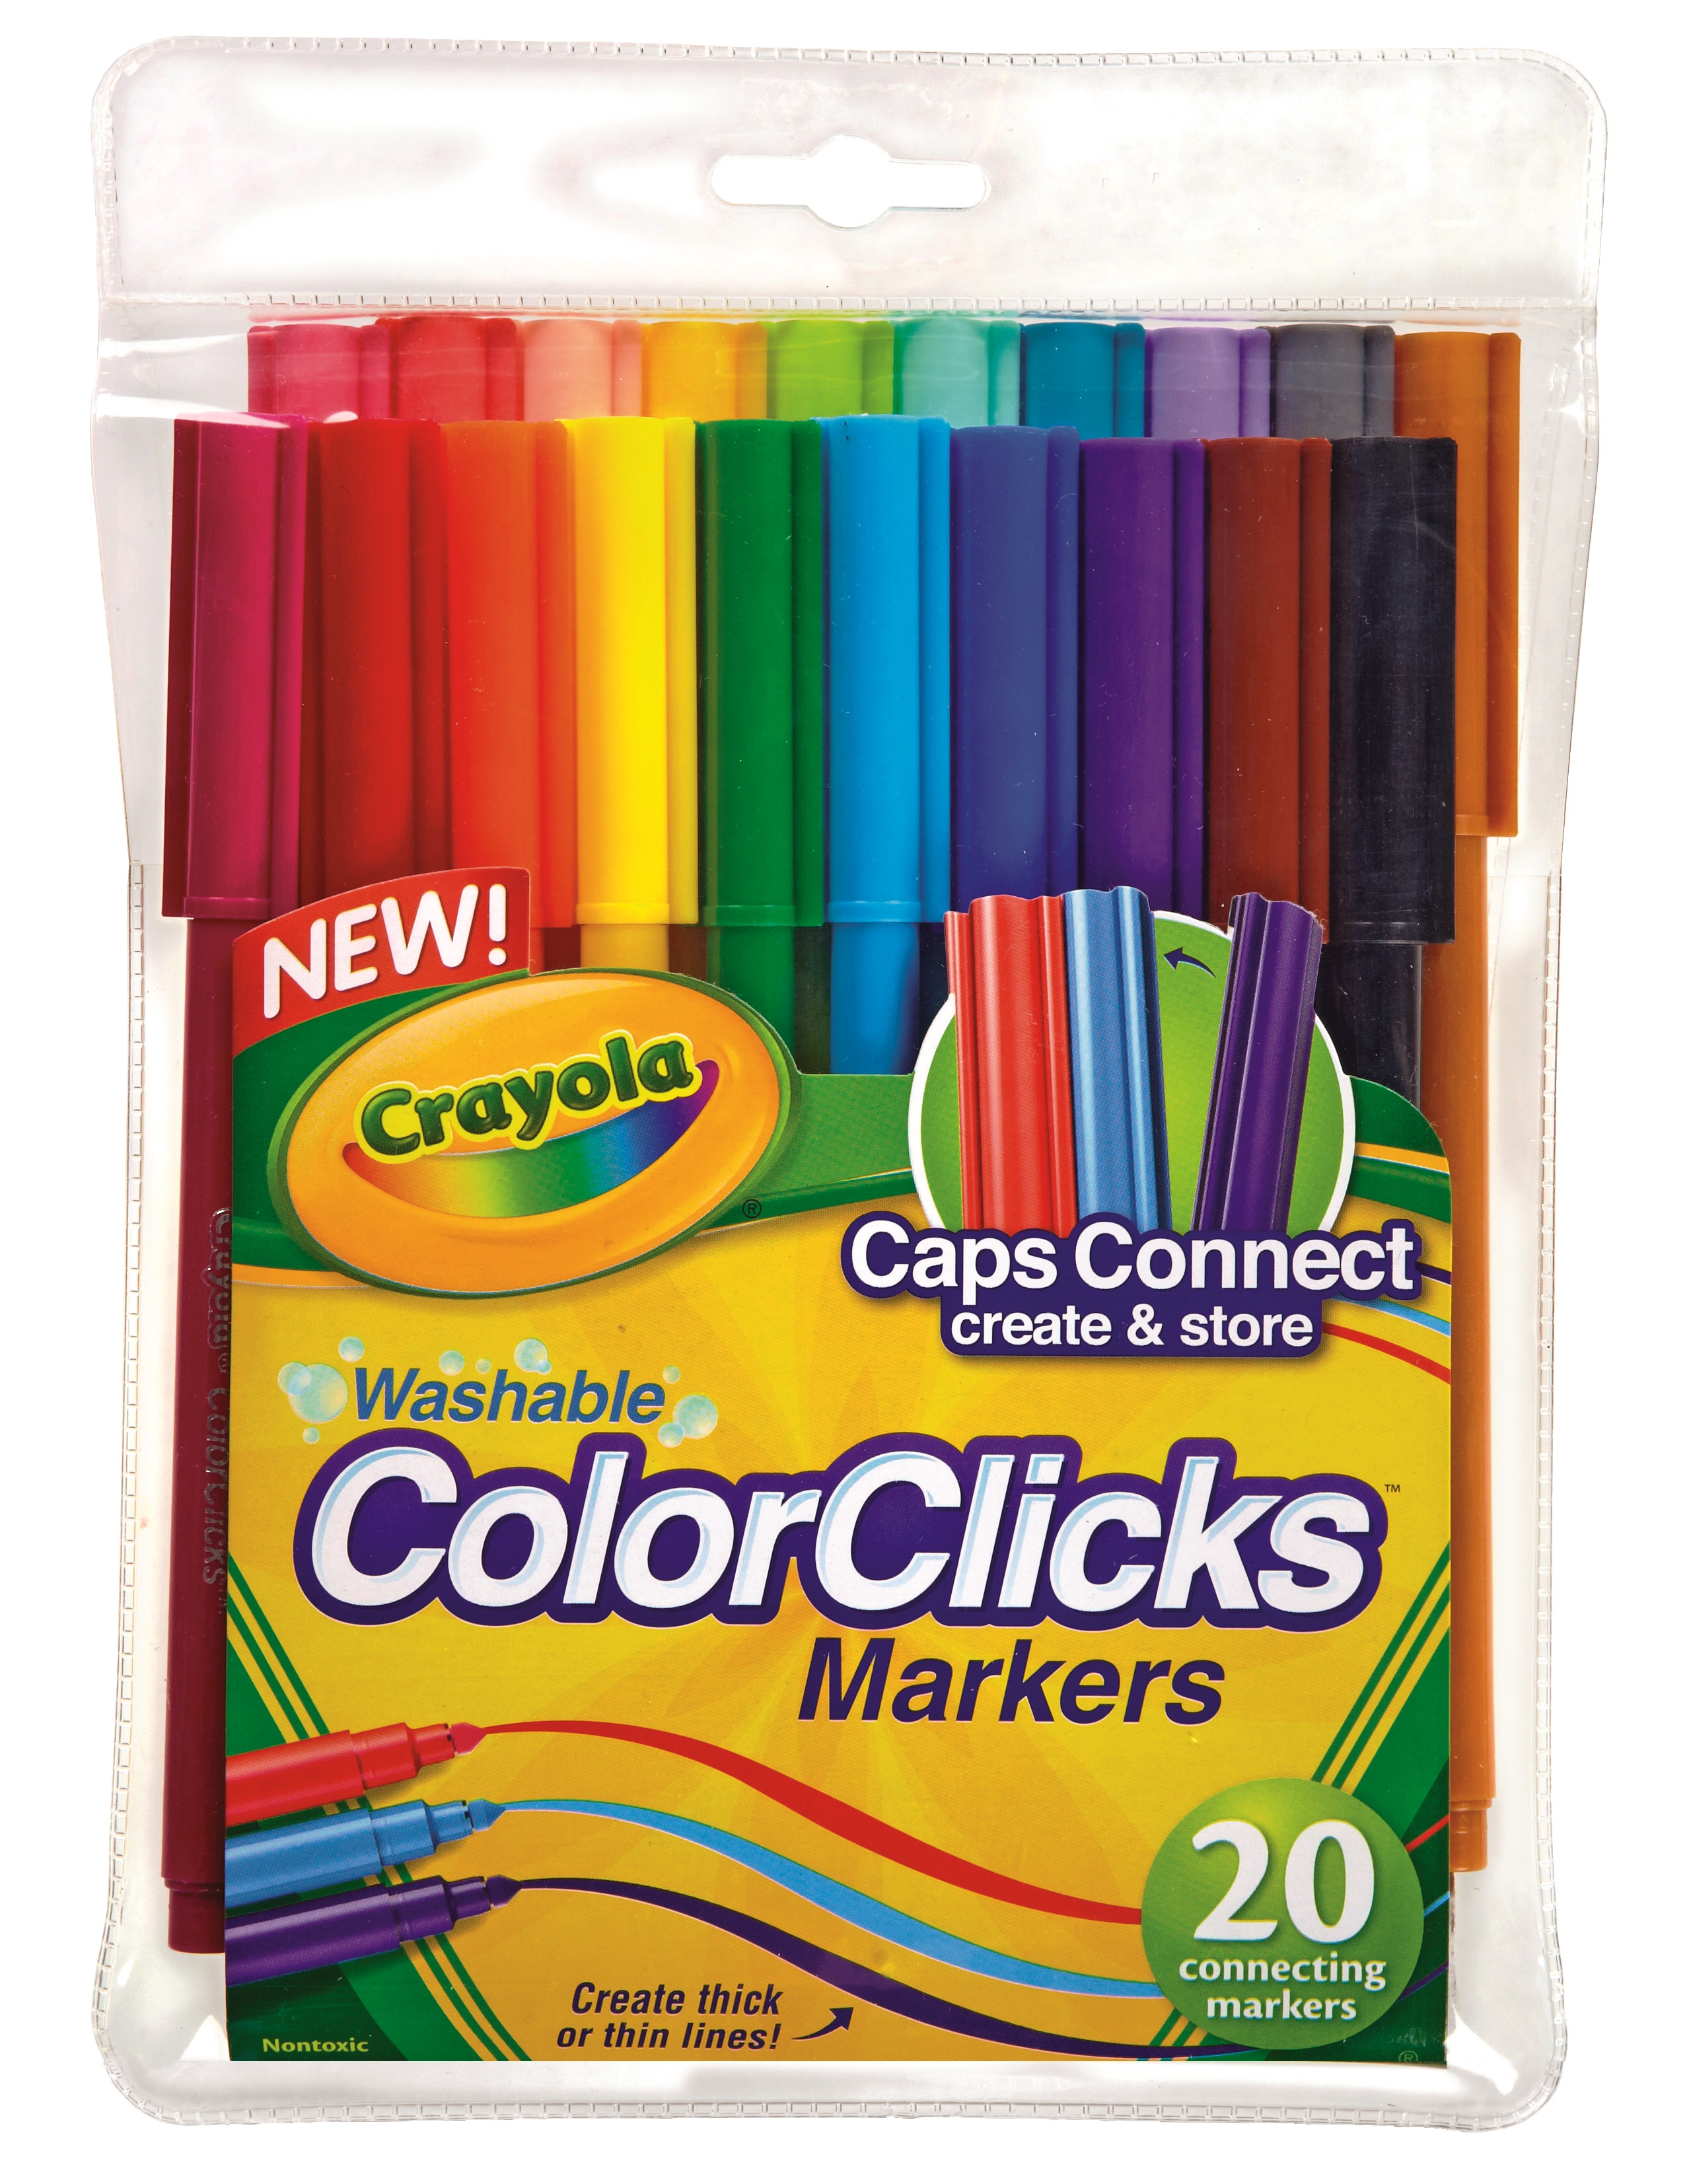 10pk Crayola Washable Color Clicks Markers – Caps Connect Together